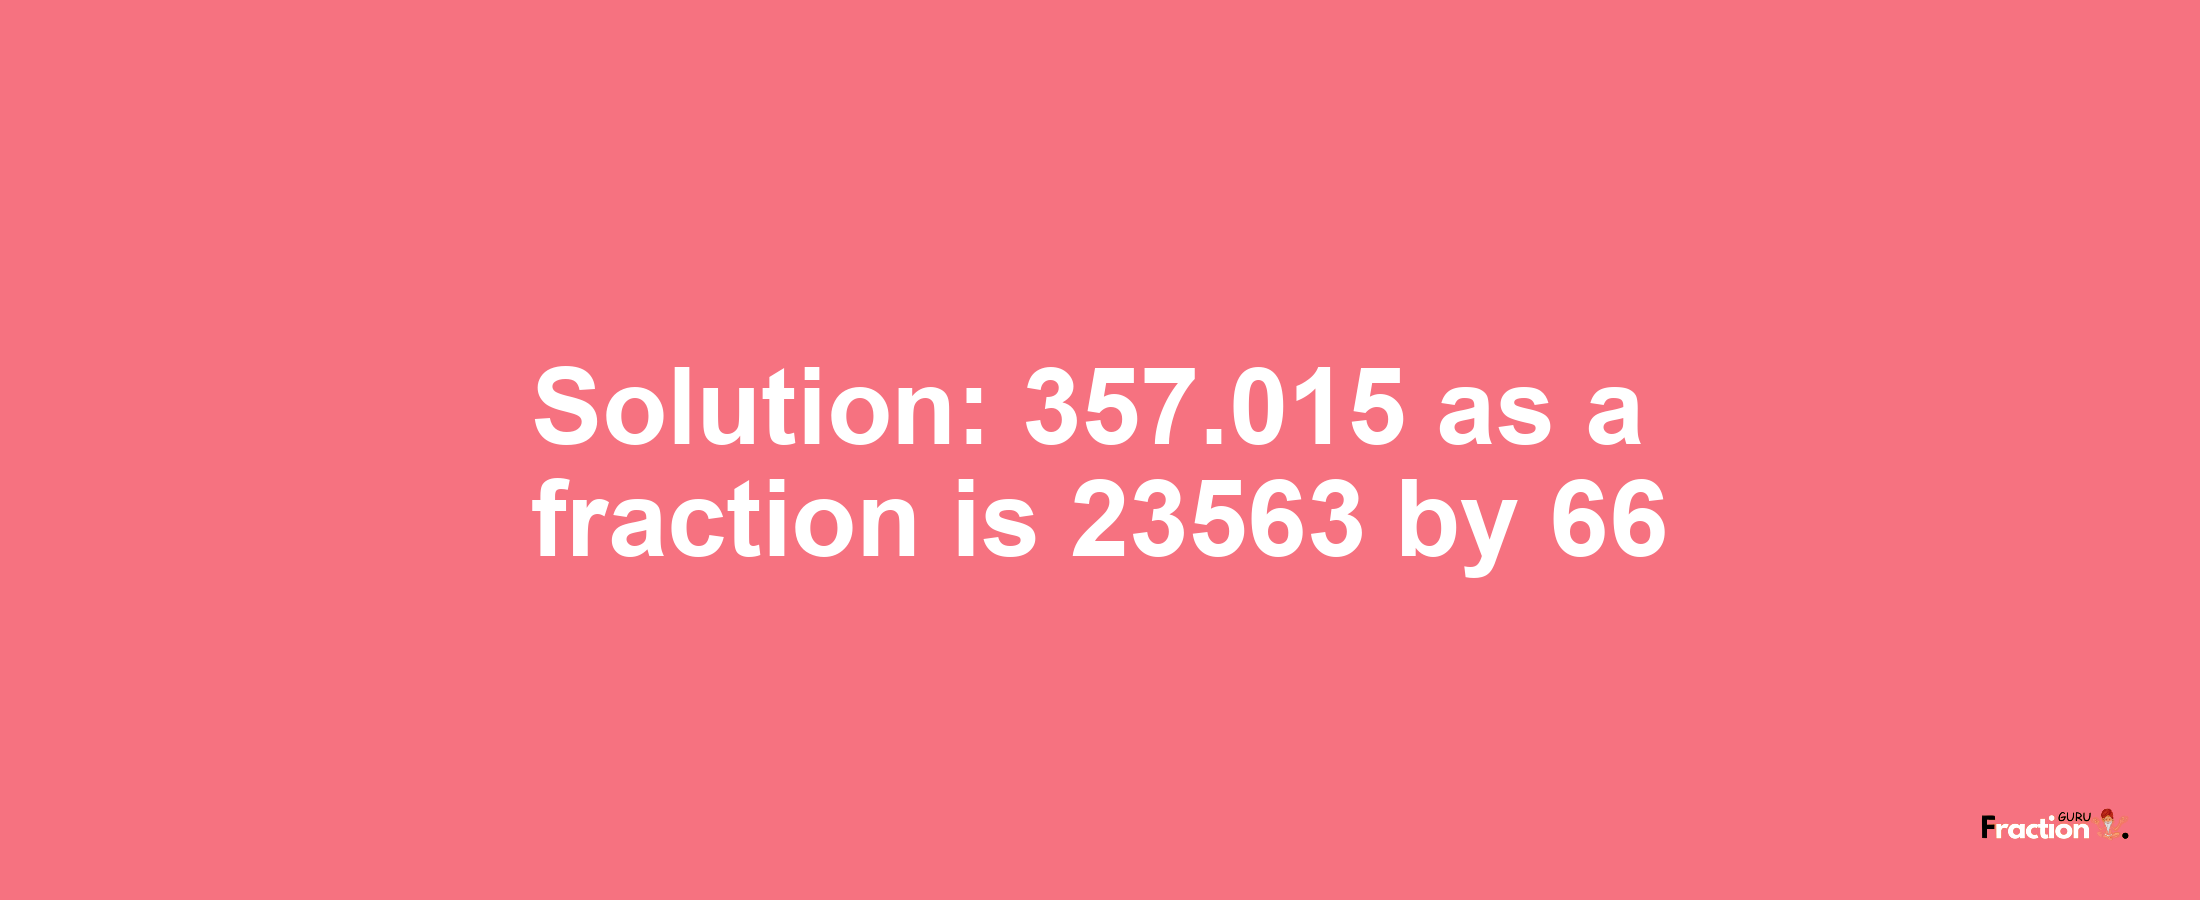 Solution:357.015 as a fraction is 23563/66